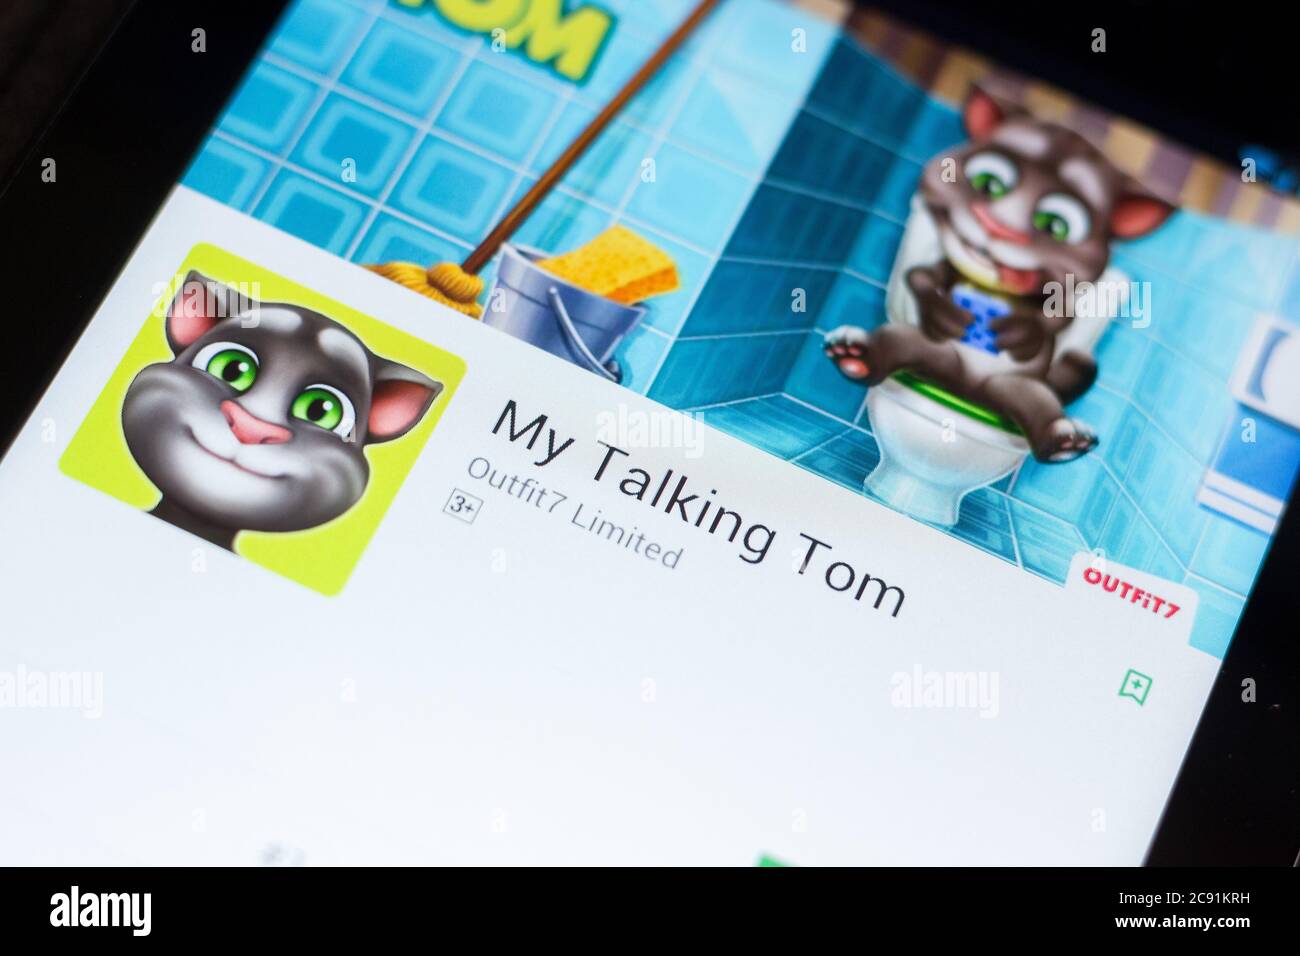 Talking Tom & Ben News by Outfit7 Limited